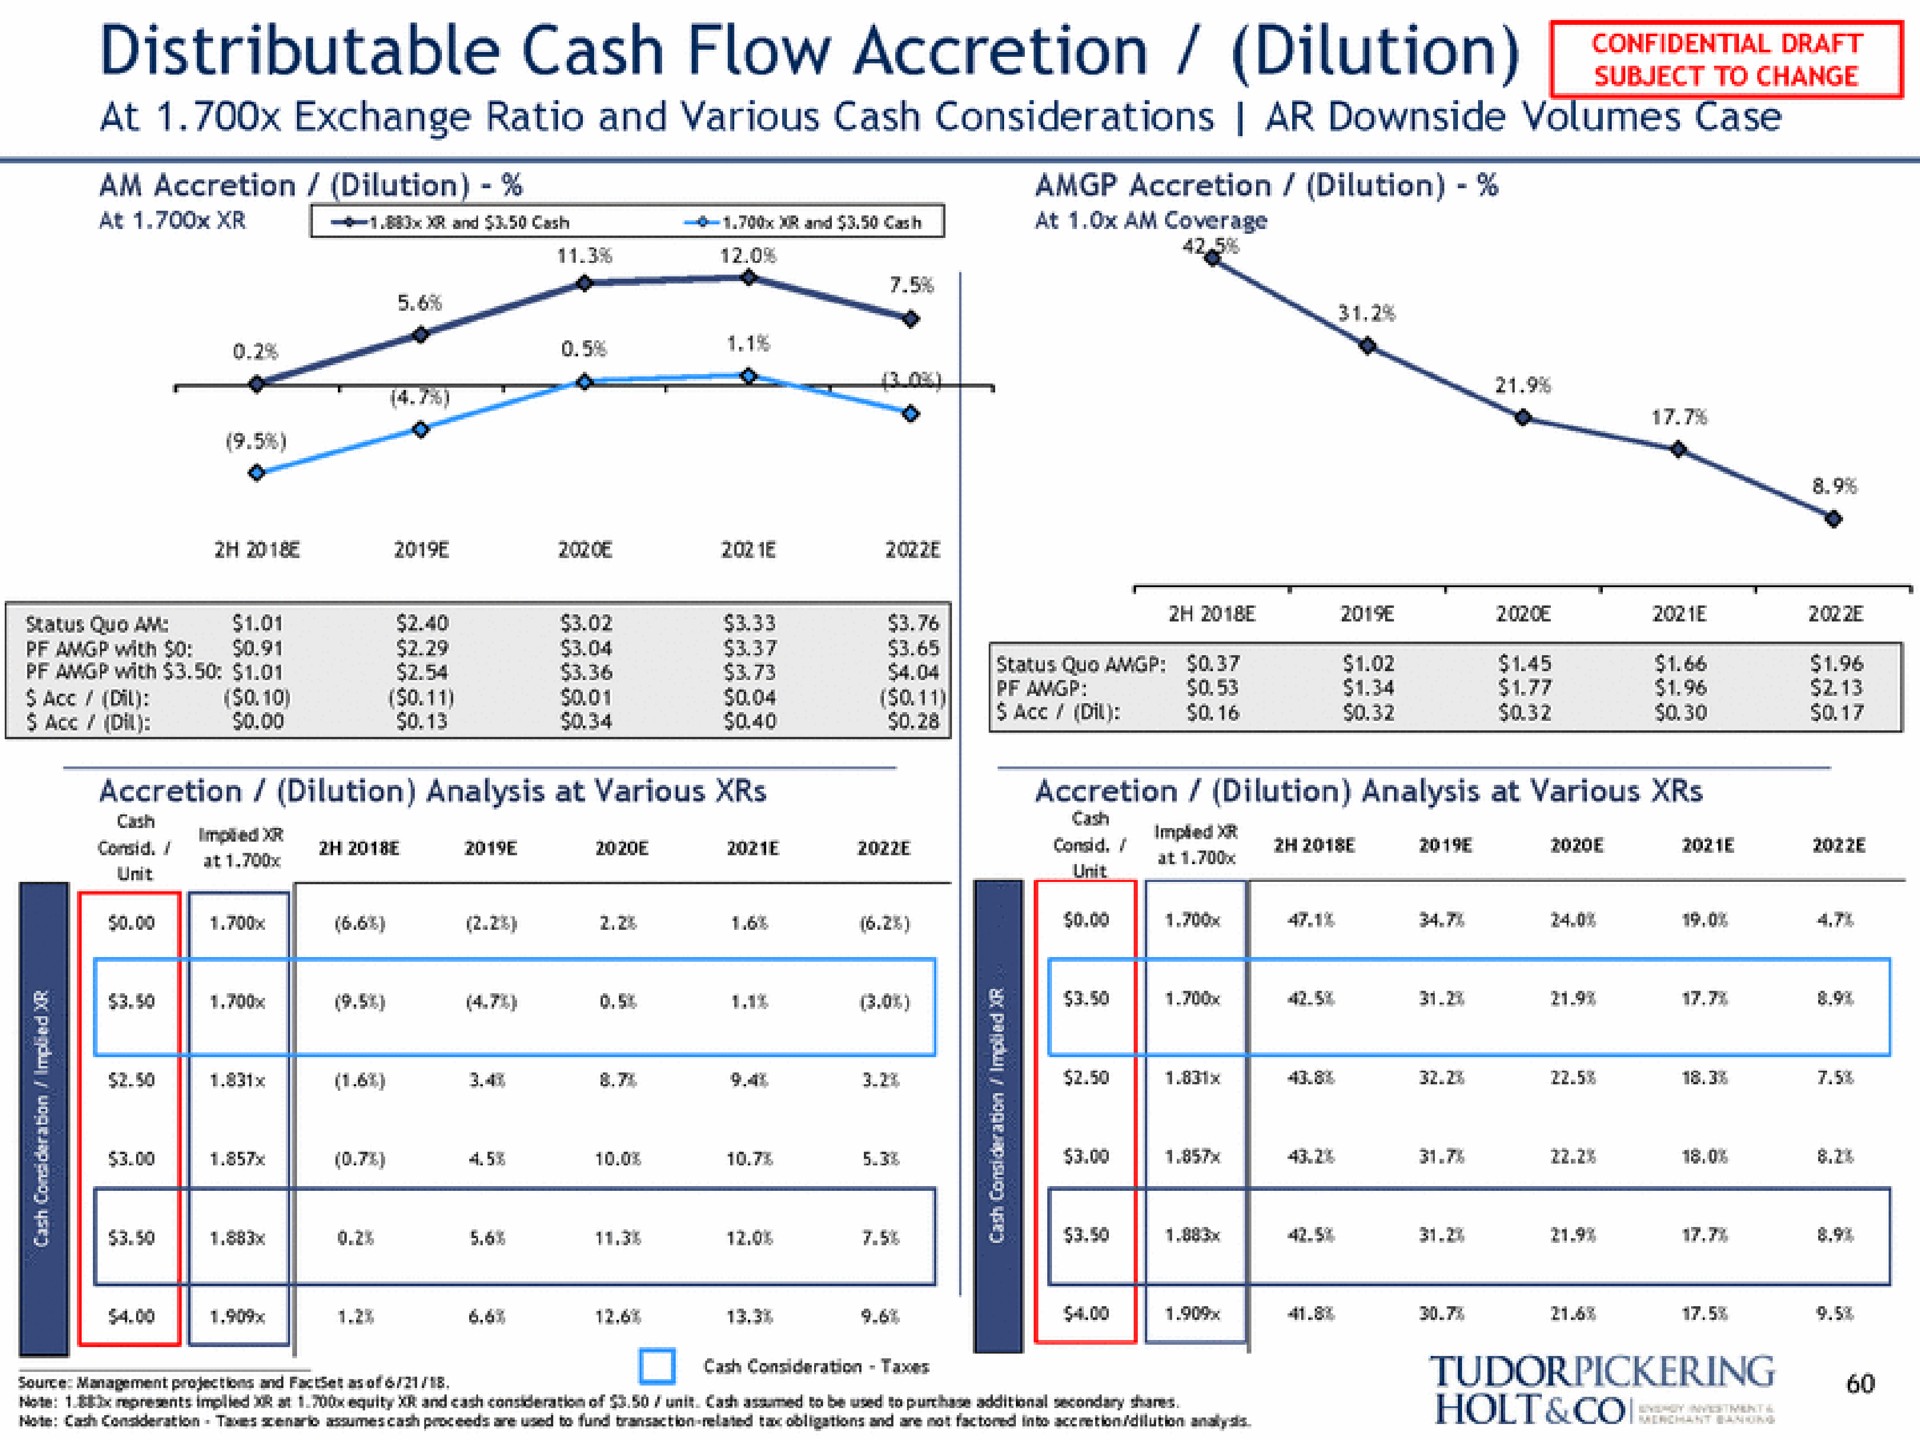 distributable cash flow accretion dilution at exchange ratio and various cash considerations downside volumes case | Tudor, Pickering, Holt & Co